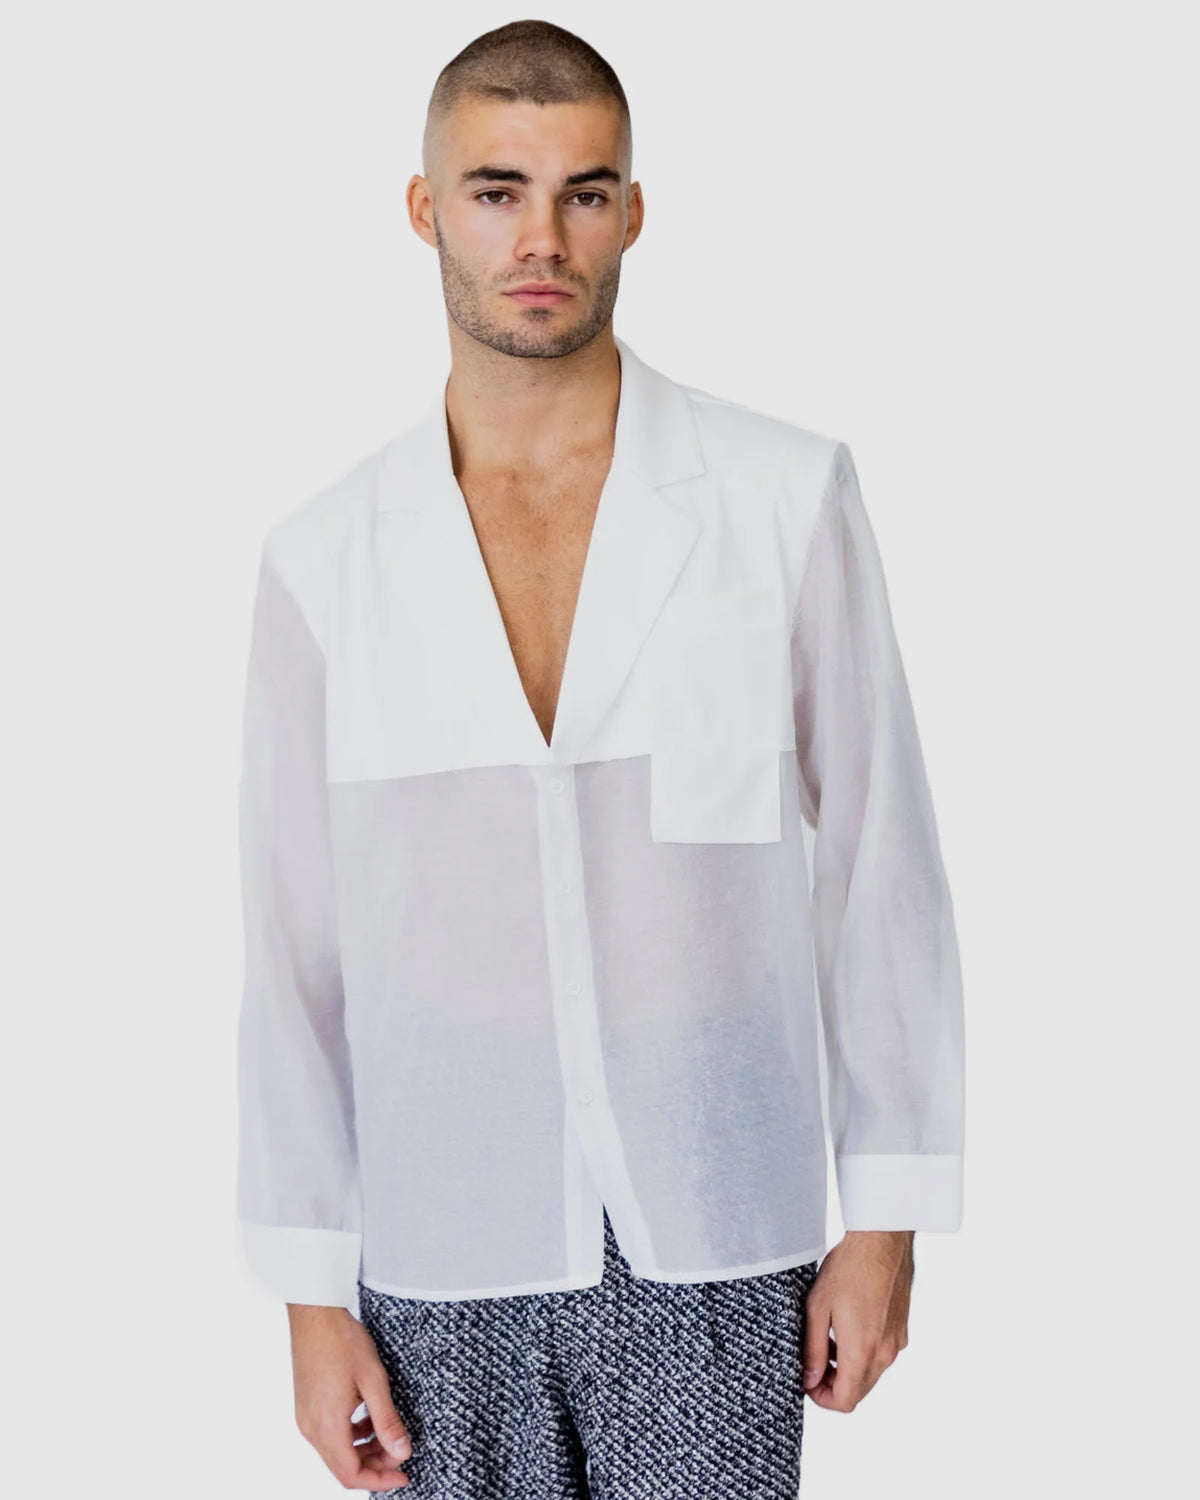 Justin Cassin Isaiah Collared Sheer Shirt in White Color